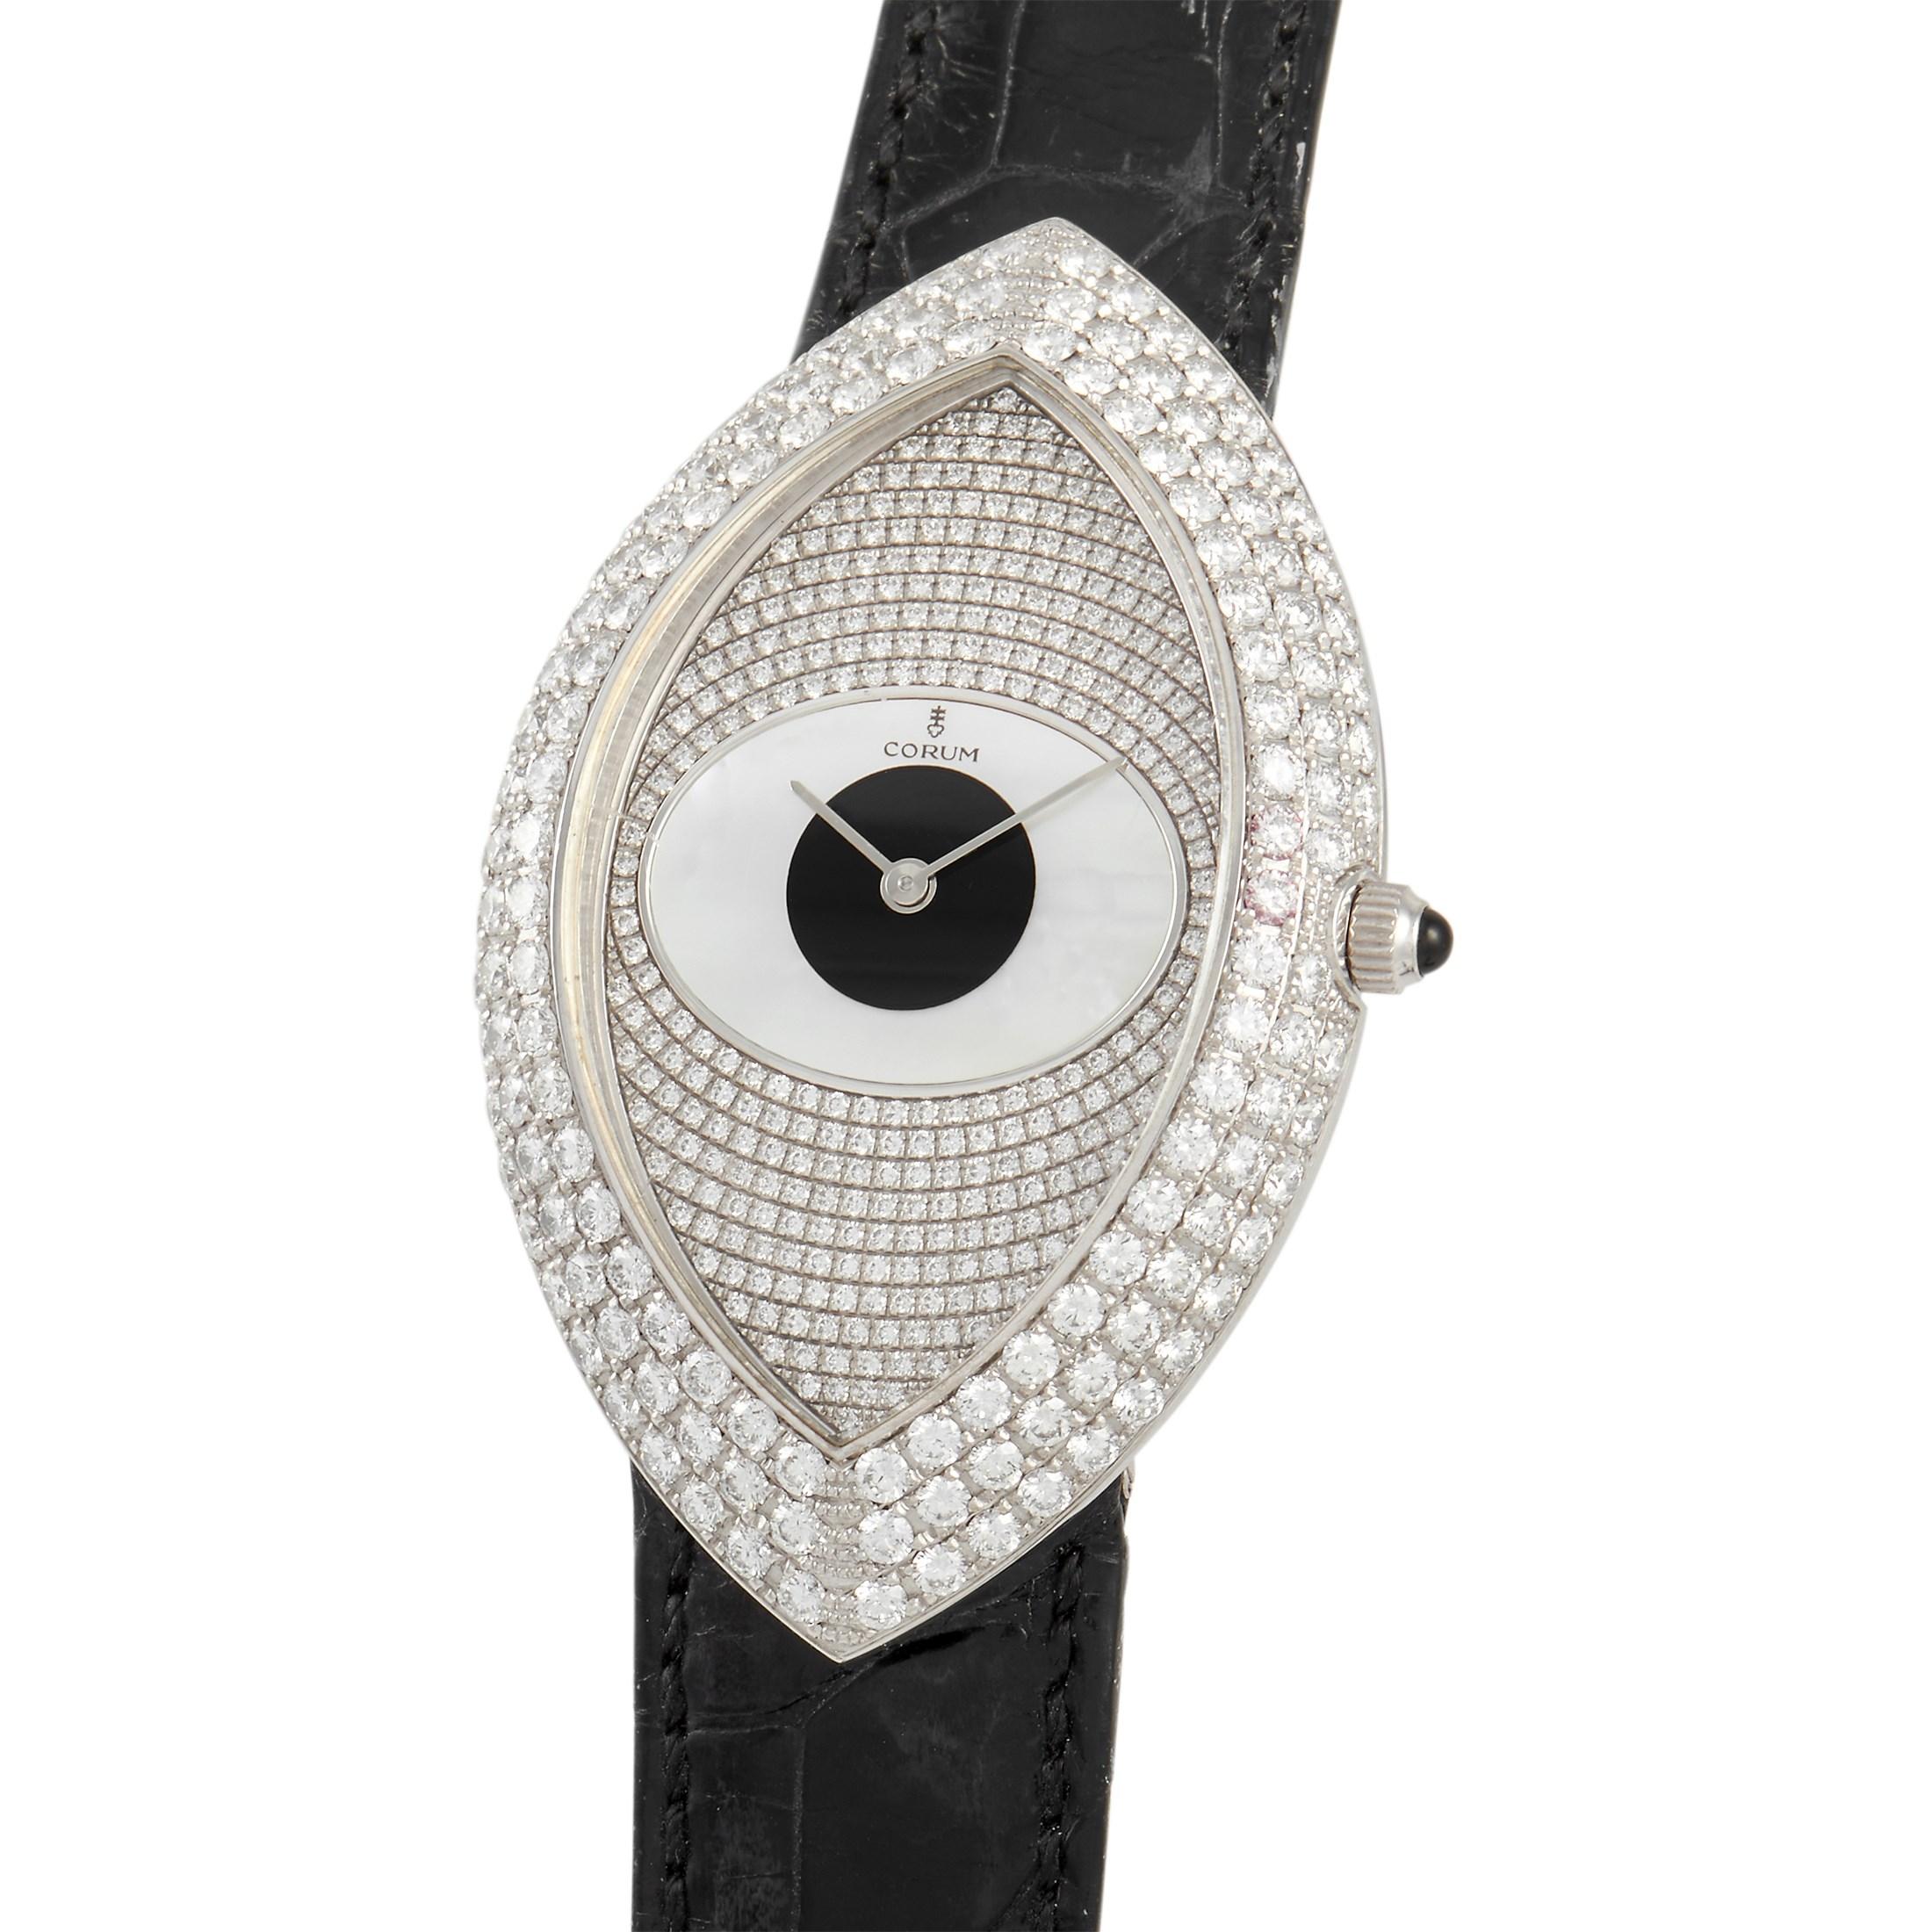 Rarely you'll find a lady's watch as stunningly attractive as this. The Corum 18K White Gold Diamond Eye-Shaped Ladies' Watch is a one-of-a-kind timepiece designed with a marquise-shaped case. Displaying a glamorous glare is an eye-like dial